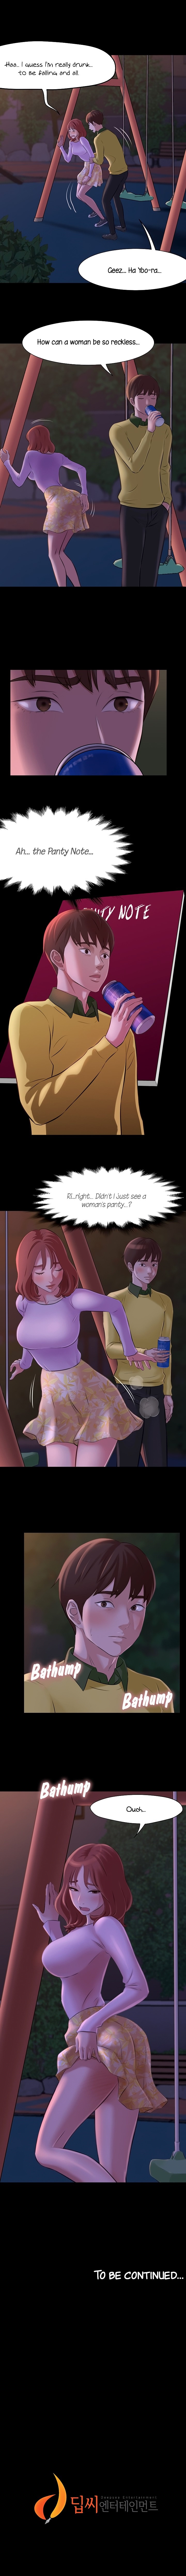 Panty Note Chapter 1 - Page 12